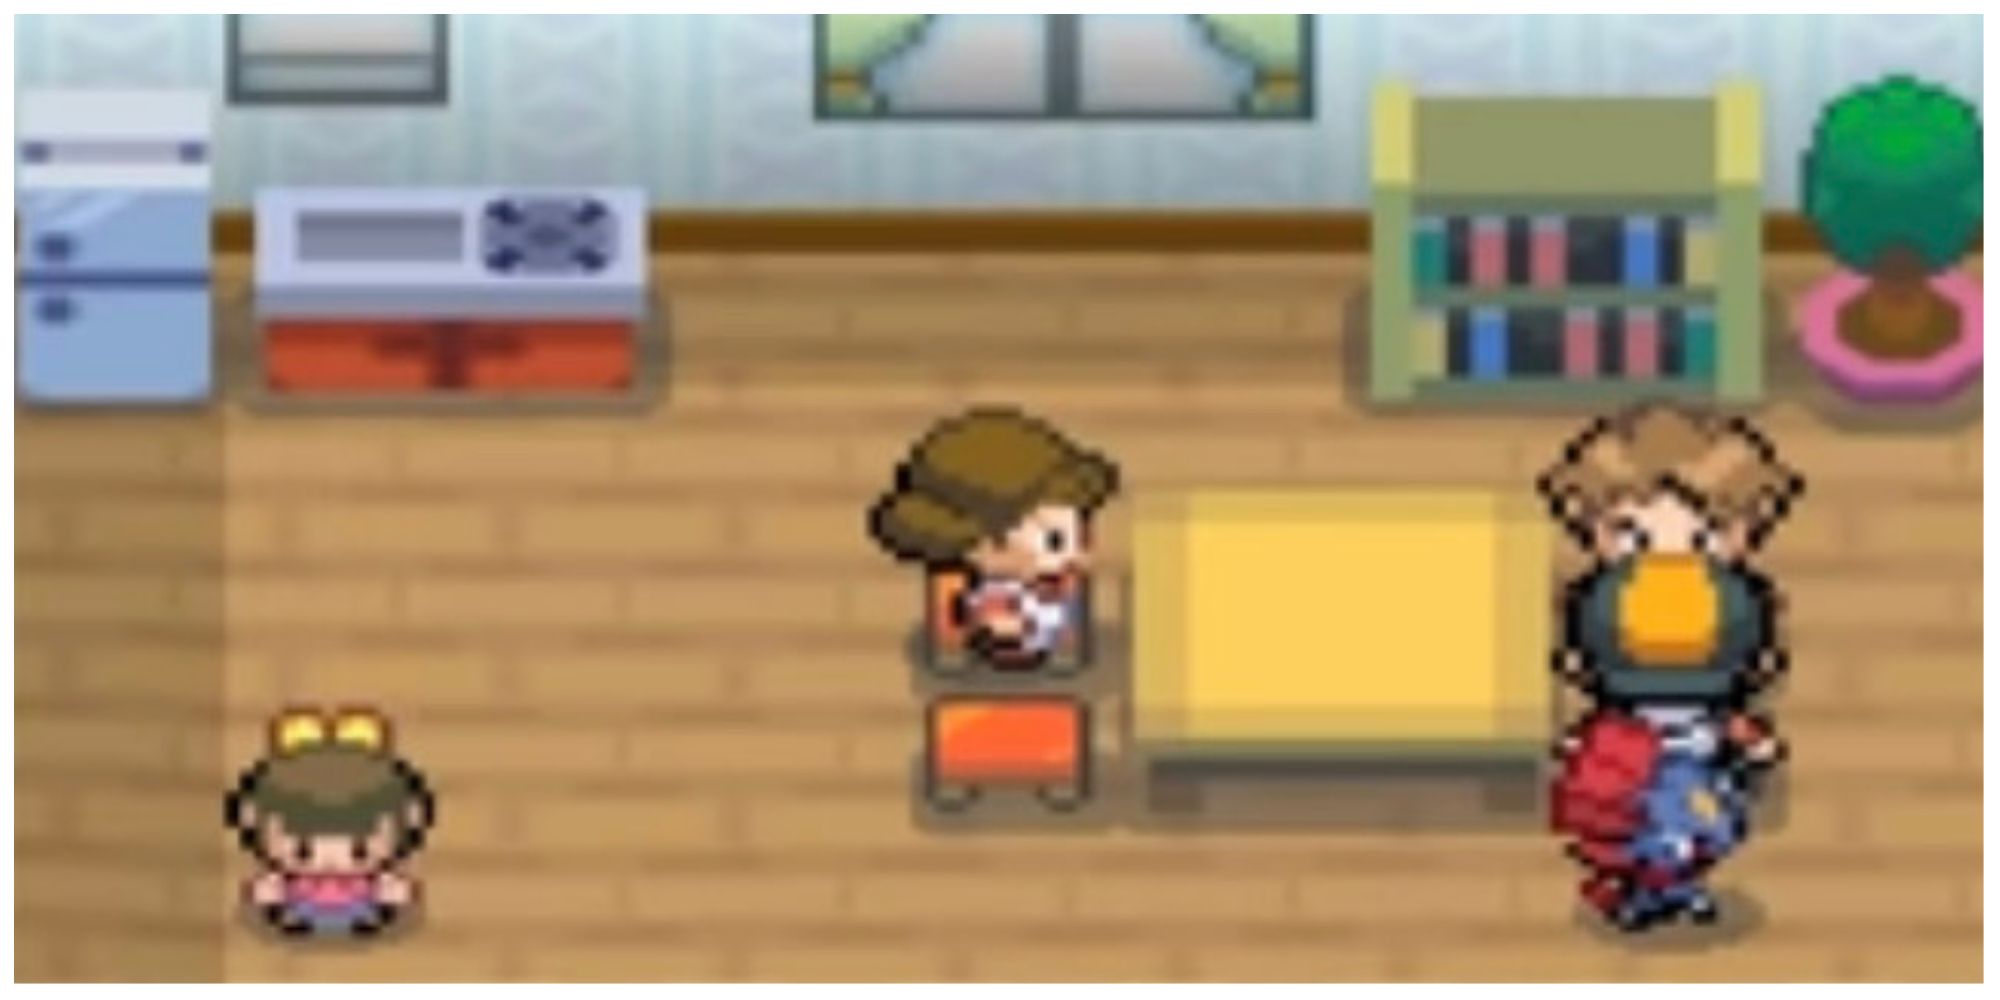 Bill's house in Goldenrod city in Pokemon heartgold and soul silver